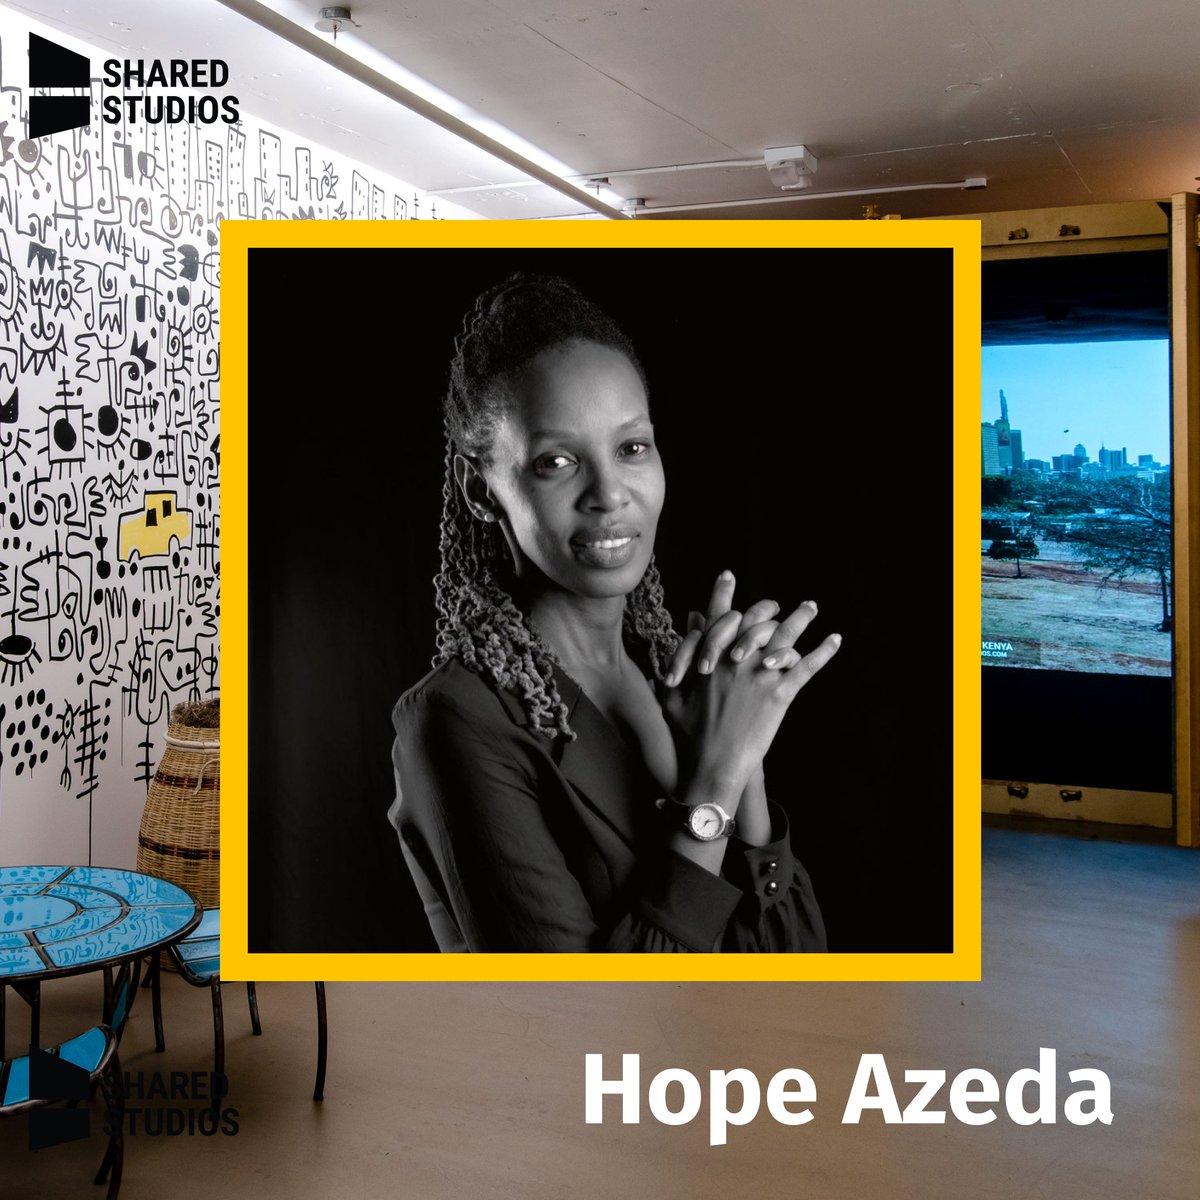 Today we’re highlighting @HopeAzeda, one of our Portal contributors and remarkable peace builders! A pioneer in using art as a tool for Peacebuilding, and a celebrated leader of Rwanda and the African continent’s arts sector.